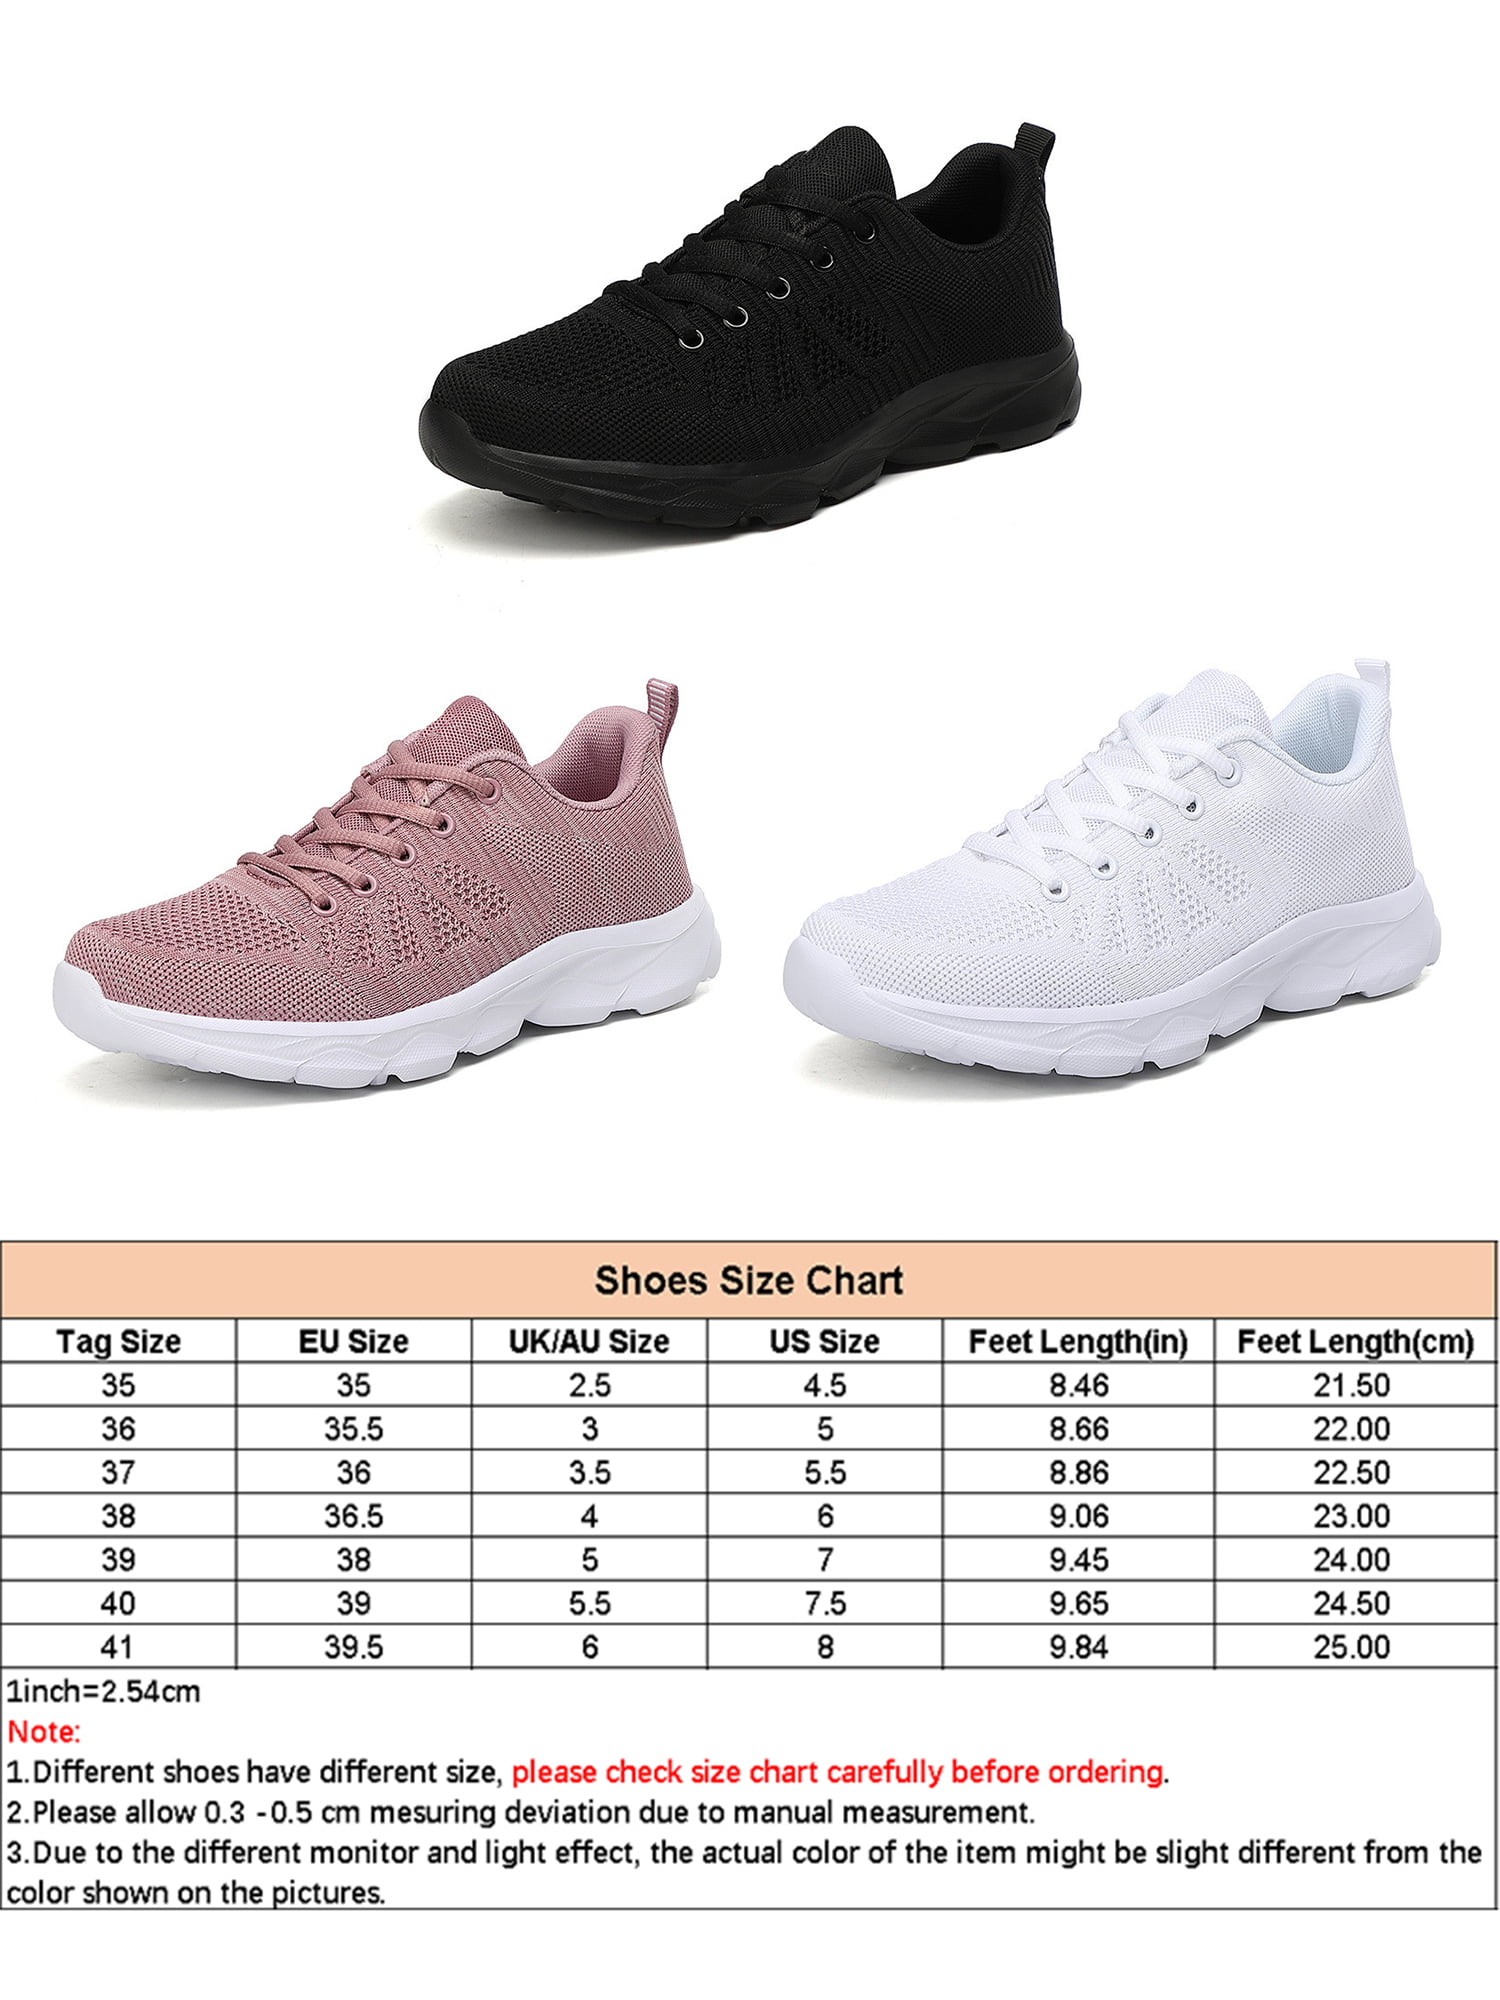 Wazshop Women Sneakers Lace Up Flats Hollow Out Athletic Shoes Non-Slip  Mesh Sport Sneaker Ladies Walking Shoe Low Top Lightweight Gray Pink 5.5 